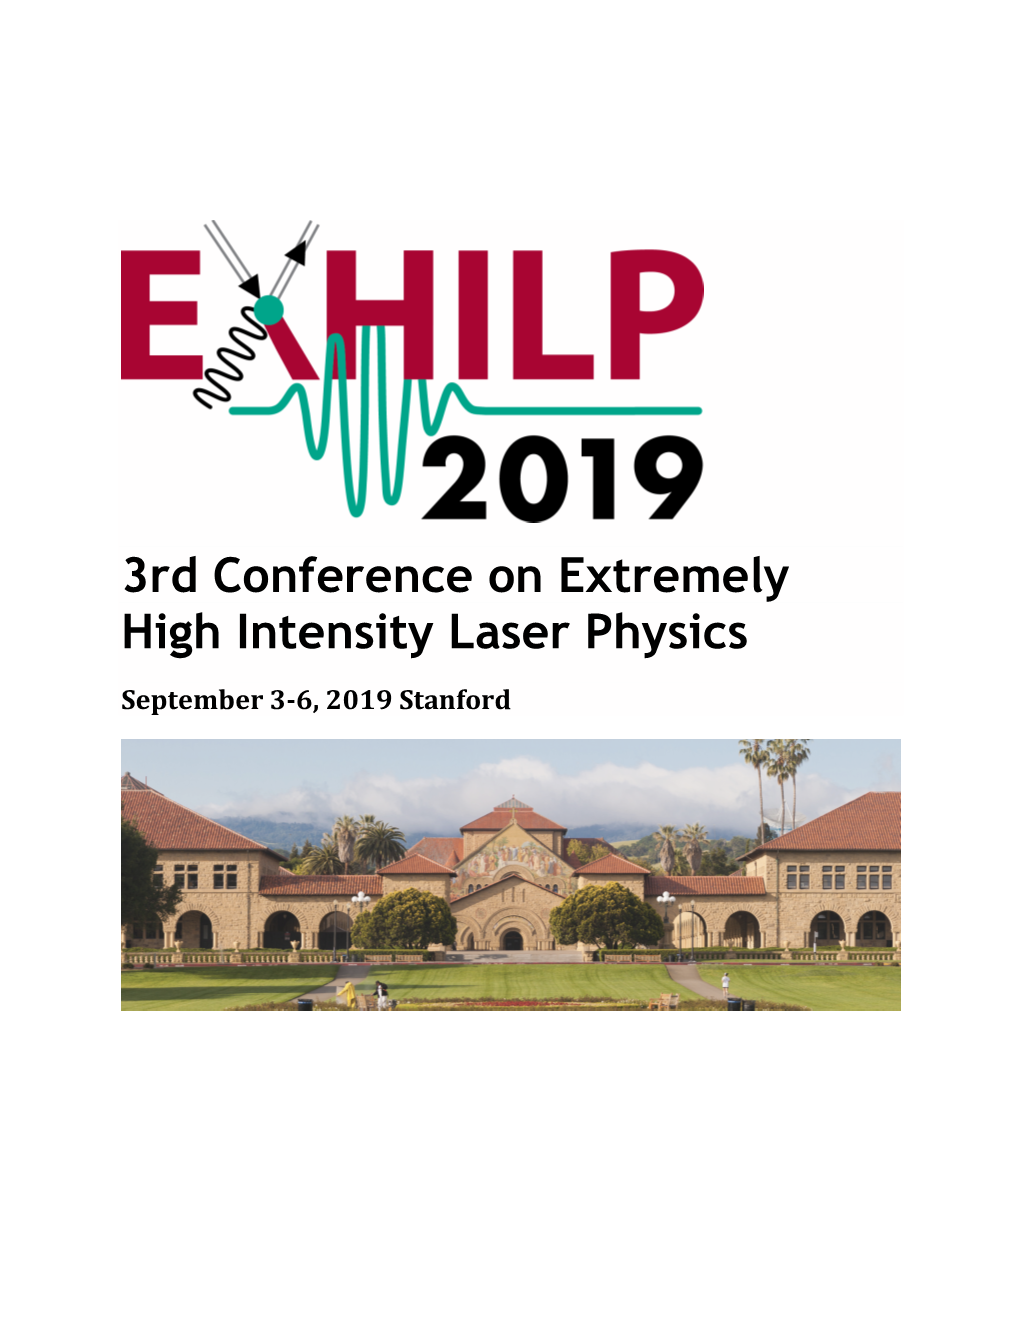 3Rd Conference on Extremely High Intensity Laser Physics